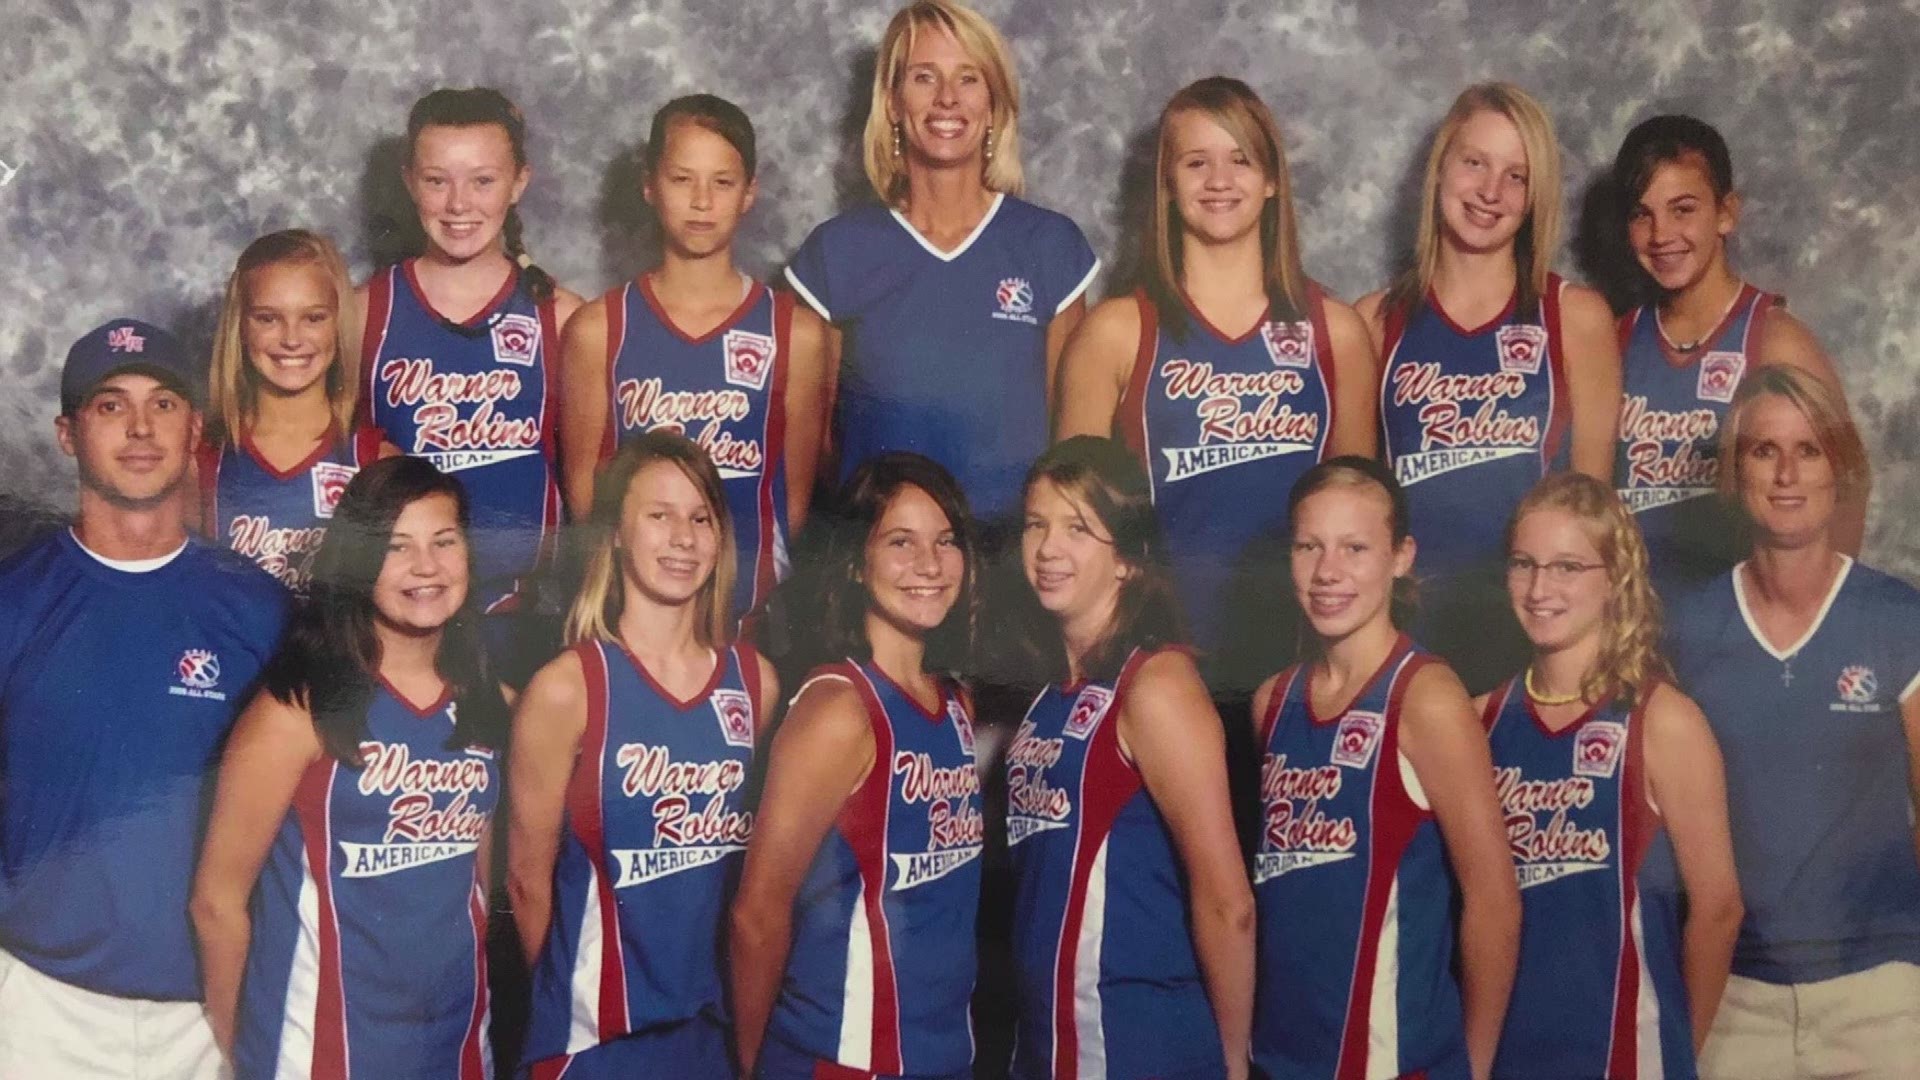 Ten years ago, the Warner Robins Little League Softball Team made history by winning the World Series title in Portland, Oregon. The former team players have grown up and are now reminiscing on their historic moment.